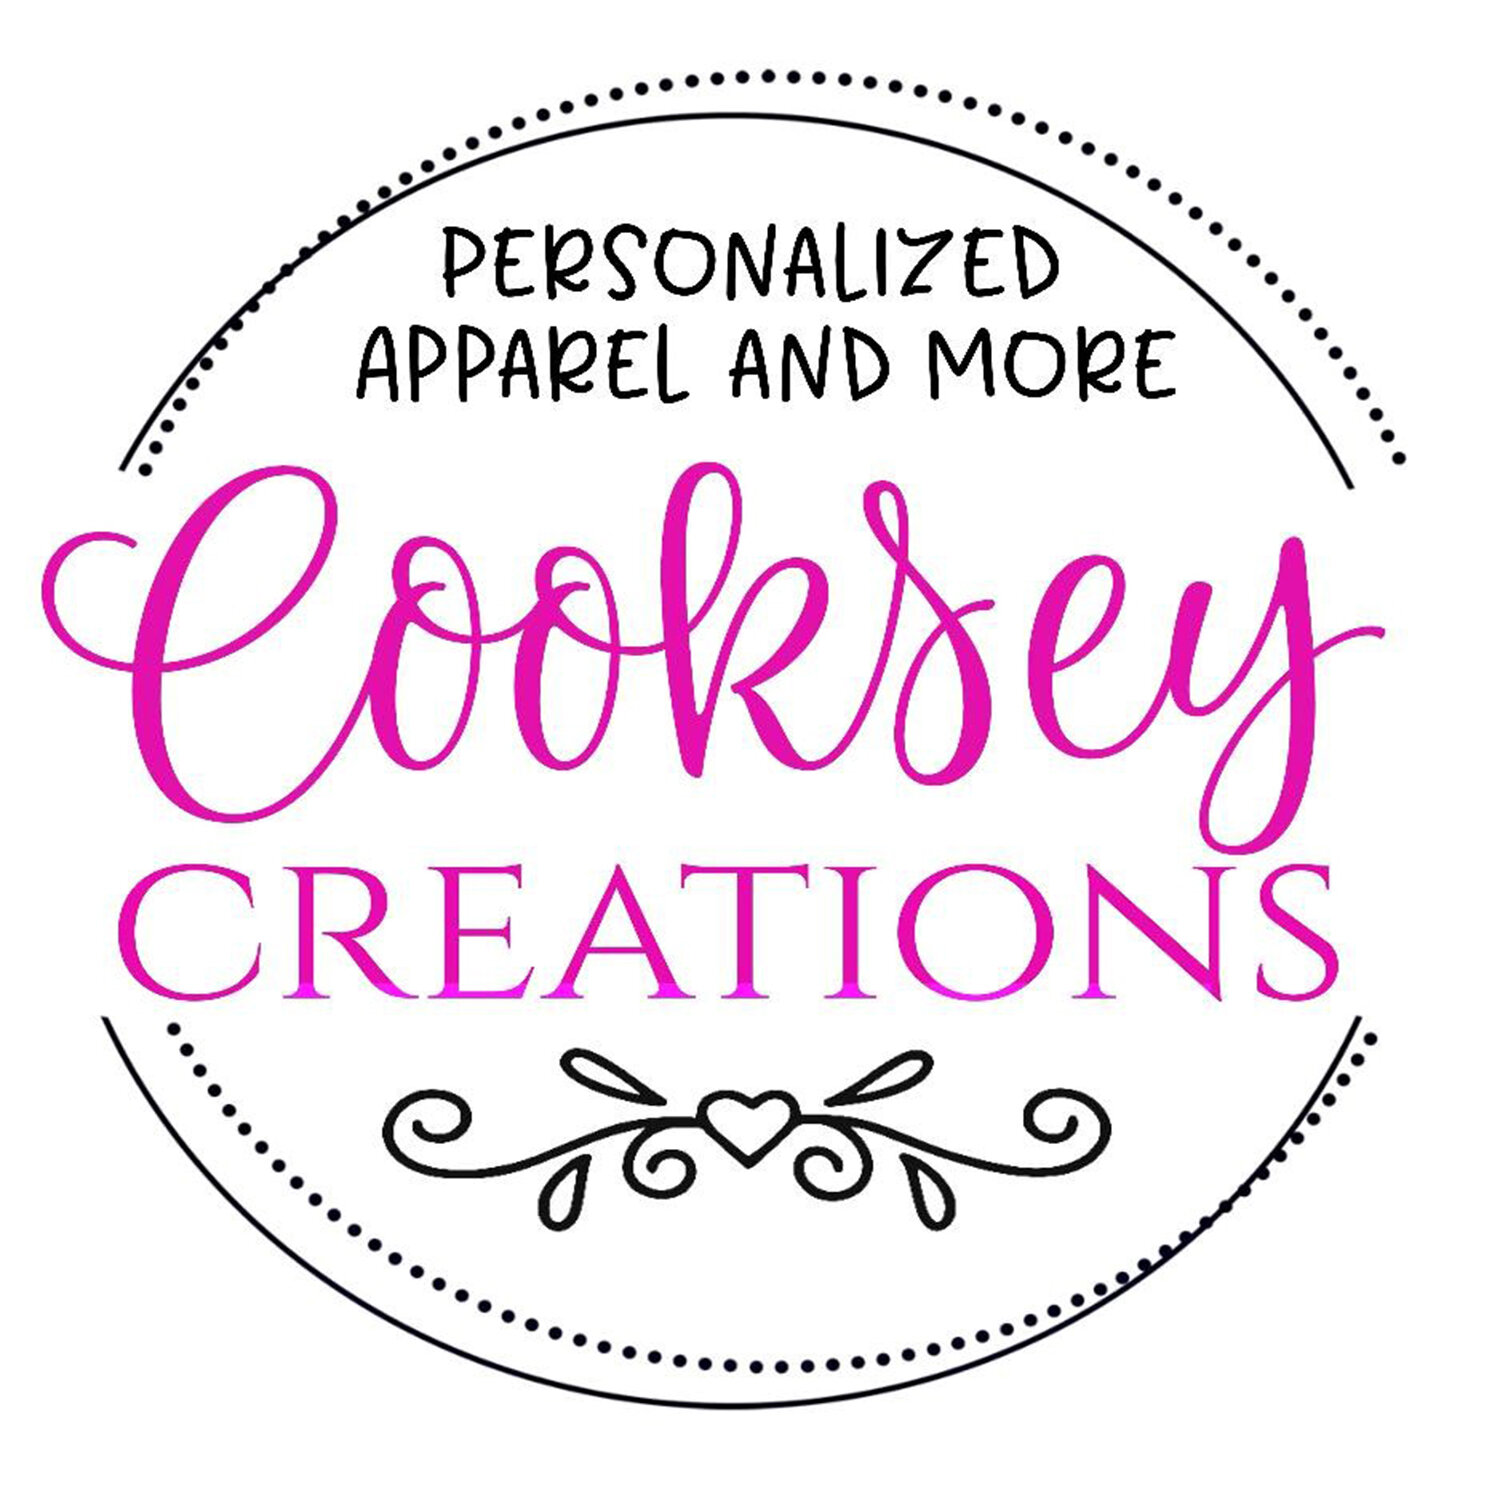 Cooksey Creations